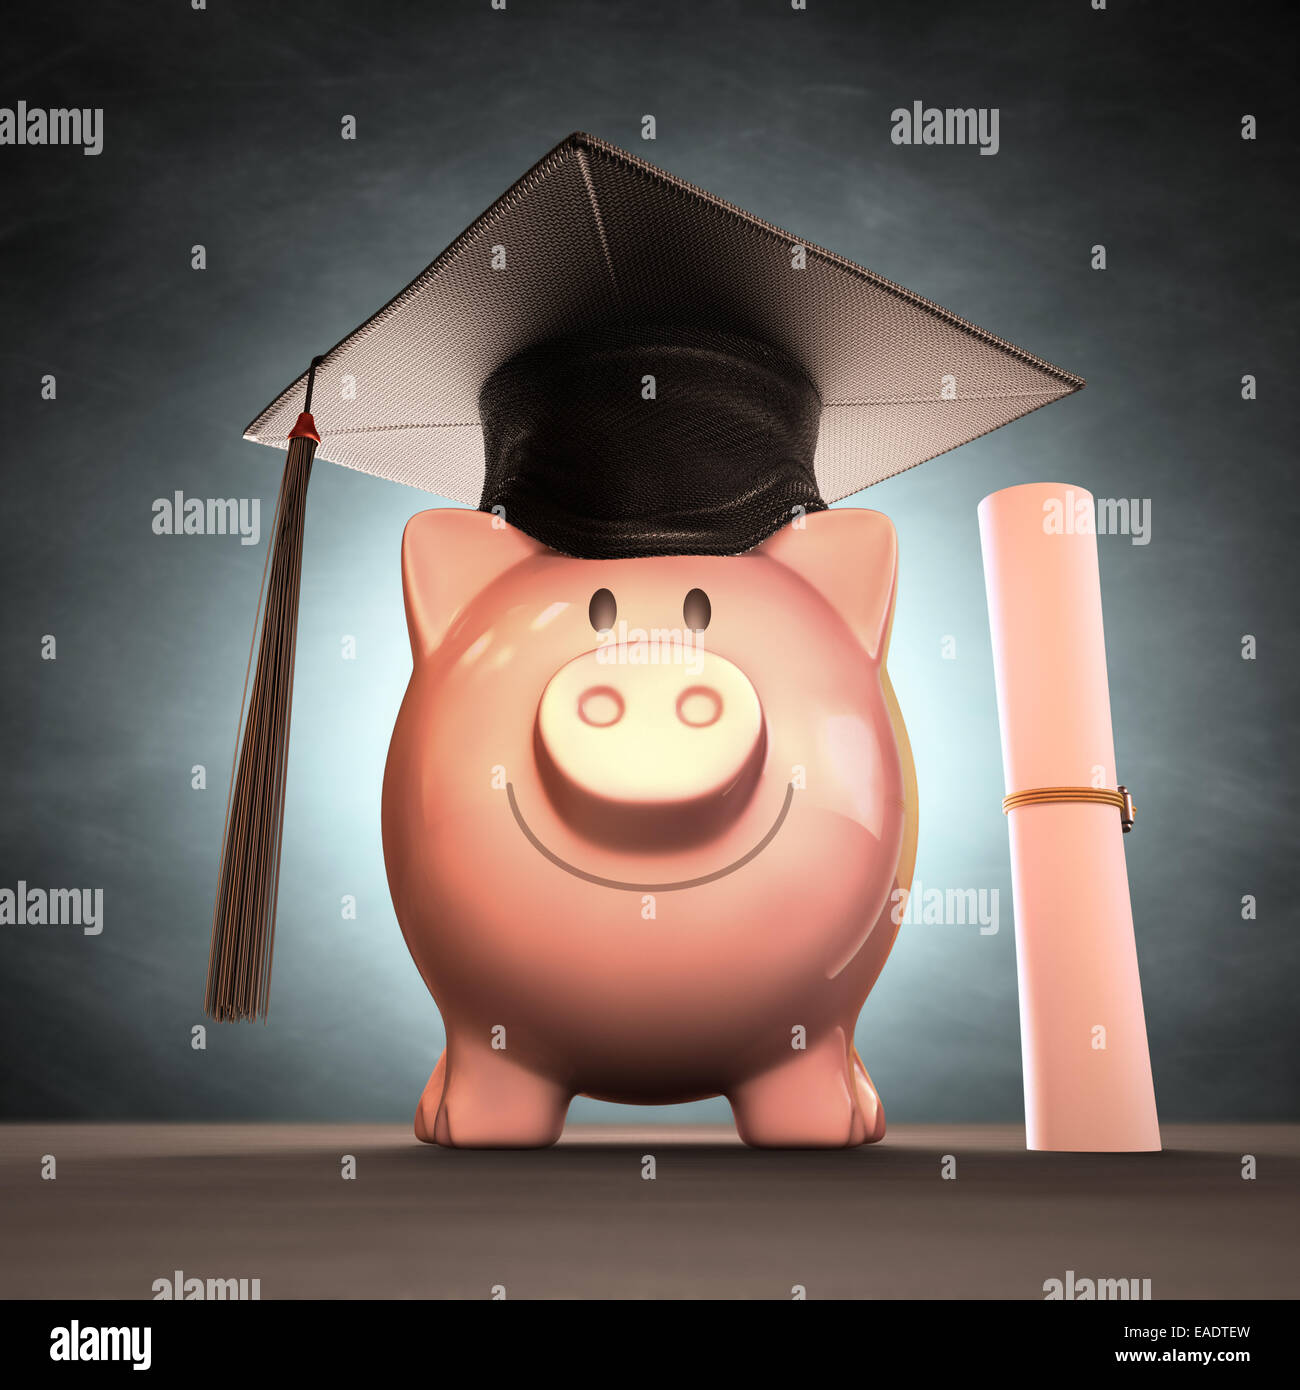 Graduation cap on piggy bank. Concept of saving money to the graduation day. Clipping path included. Stock Photo